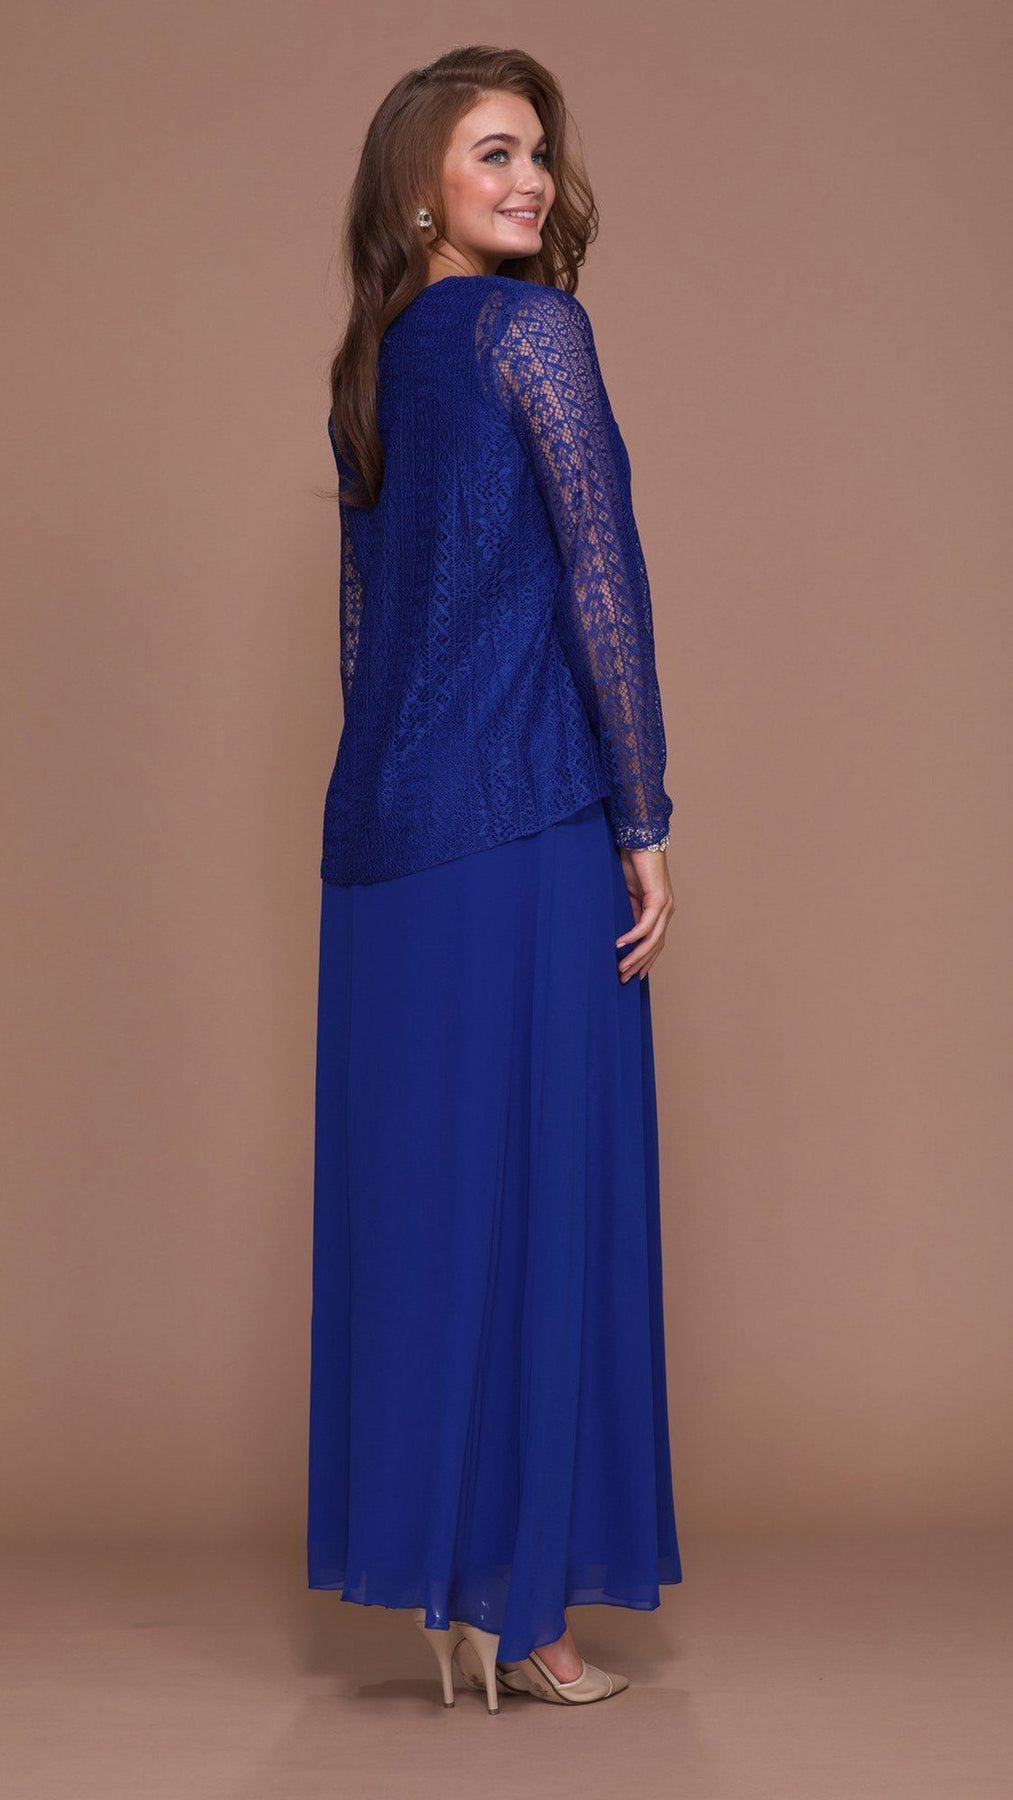 Nox Anabel - 5140SC Long V-Neck Lace Dress with Sheer Jacket